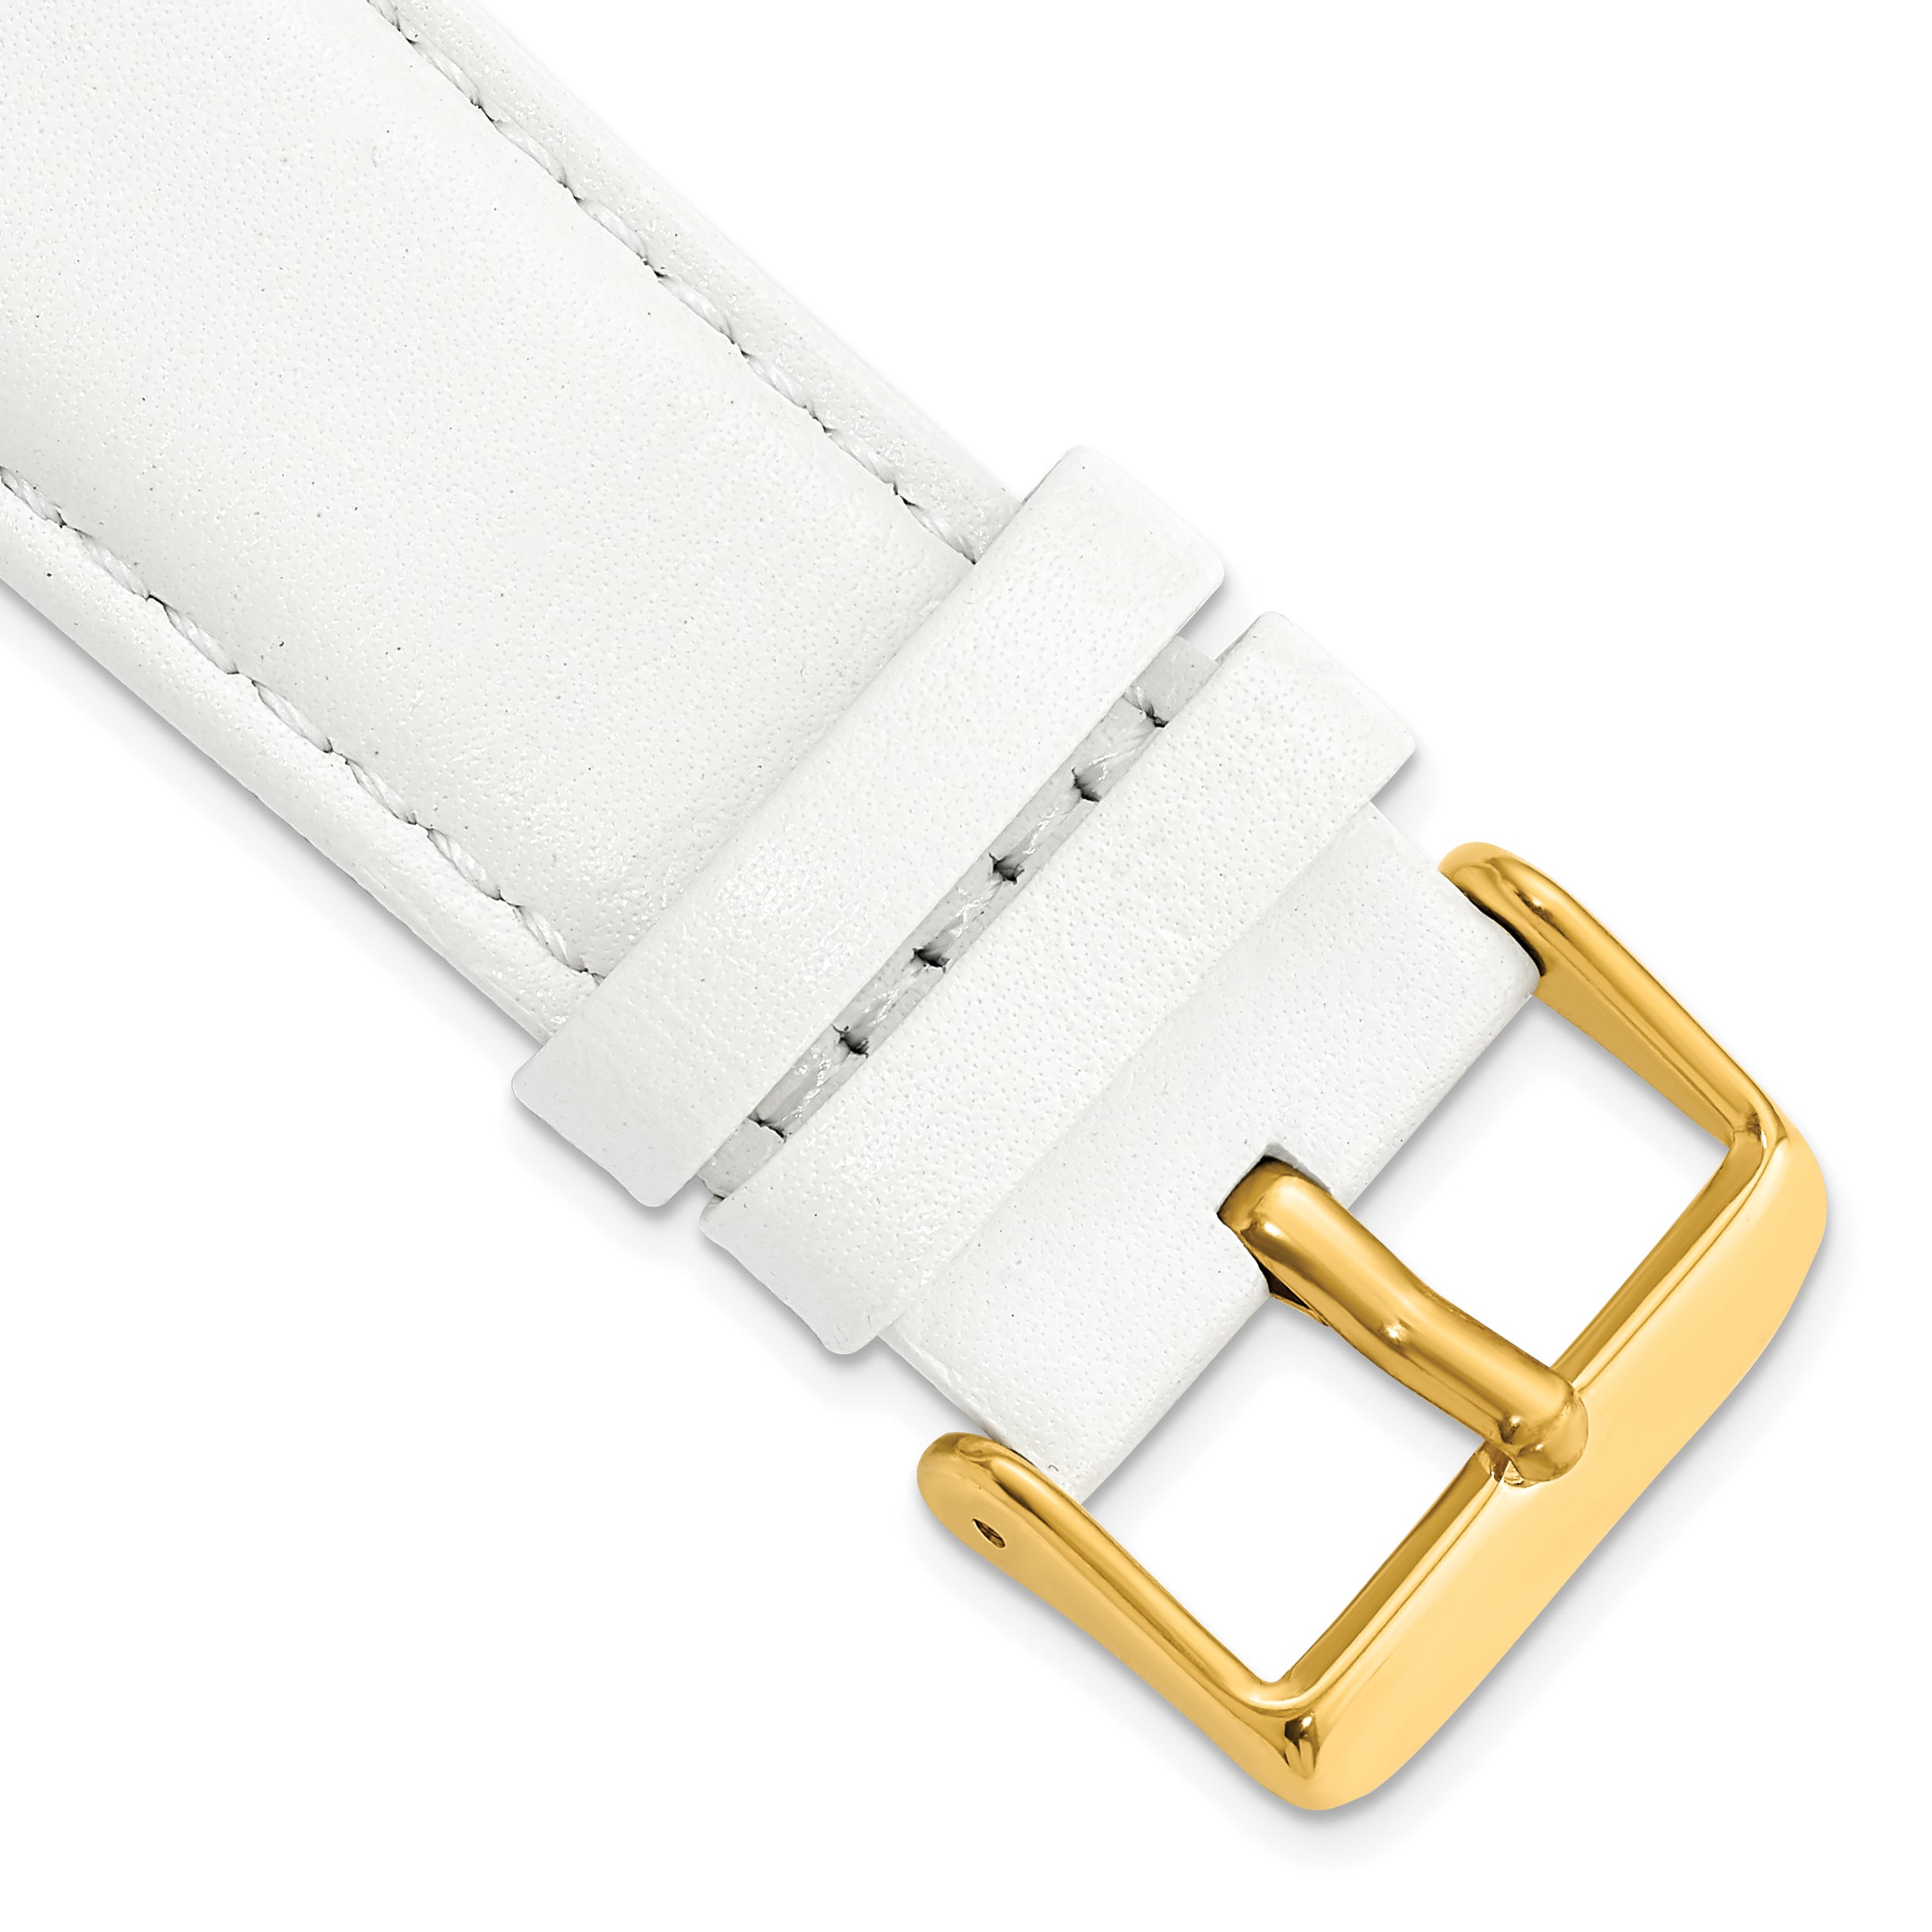 DeBeer 24mm White Glove Leather with Gold-tone Panerai Style Buckle 7.75 inch Watch Band